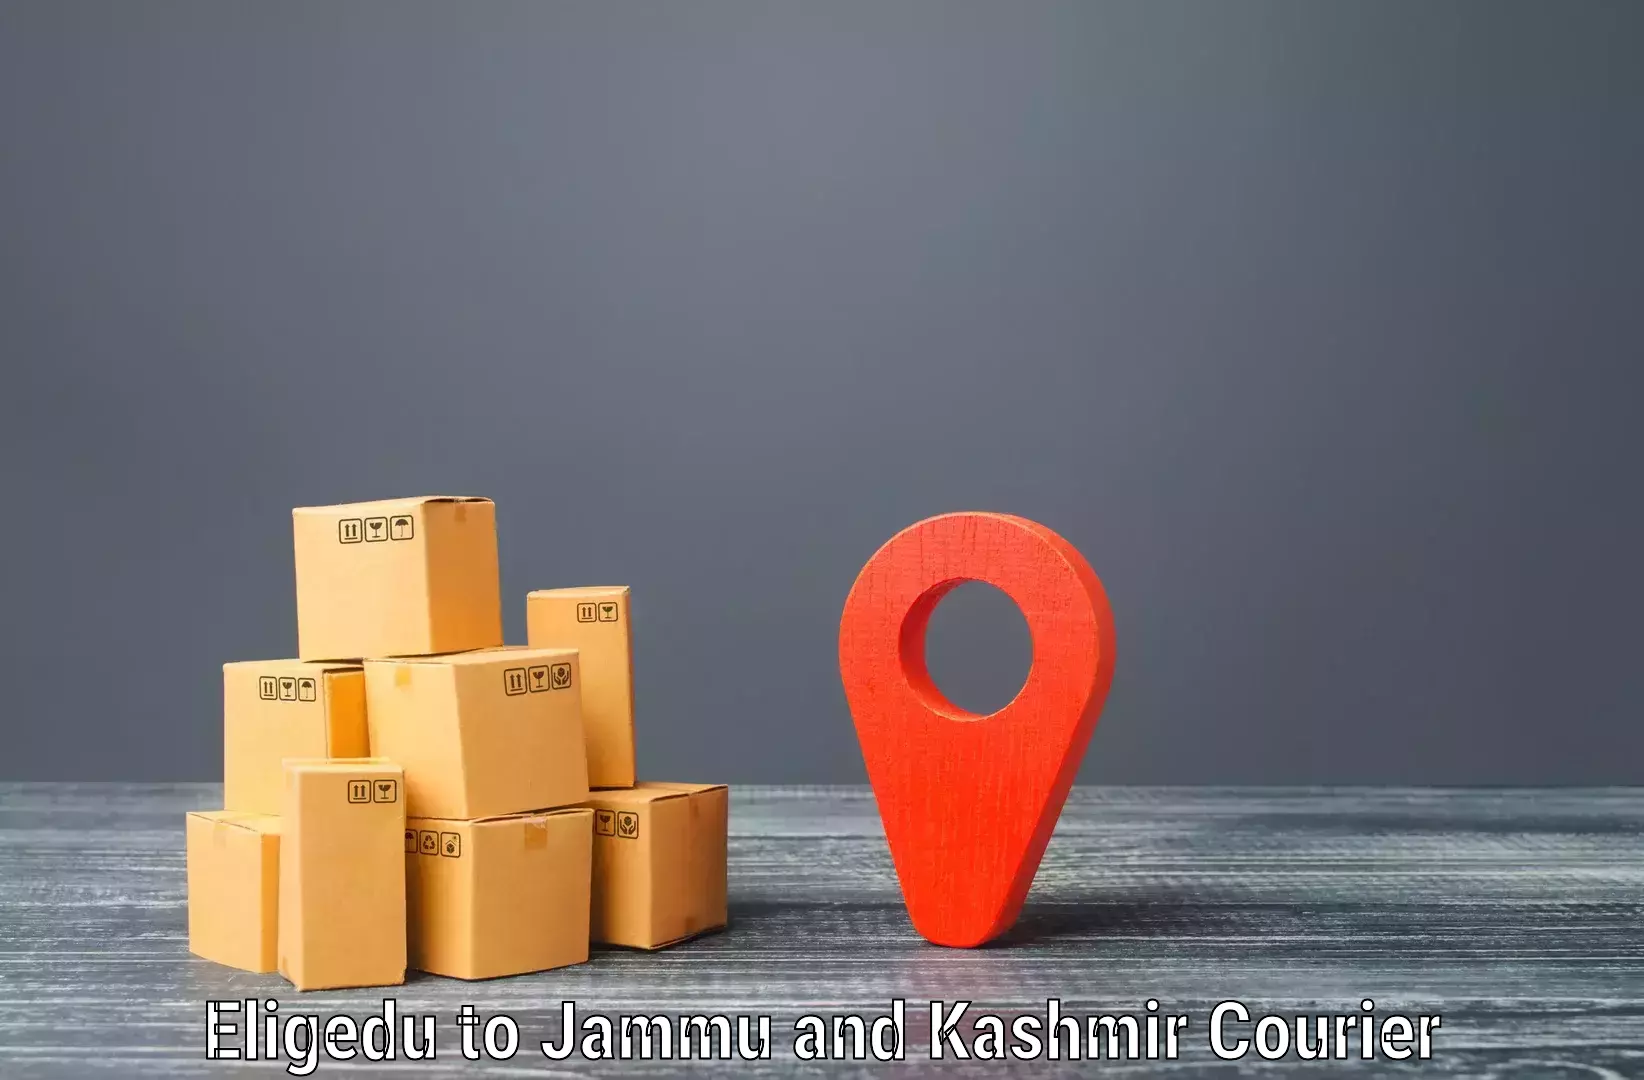 Fast delivery service in Eligedu to Bhaderwah